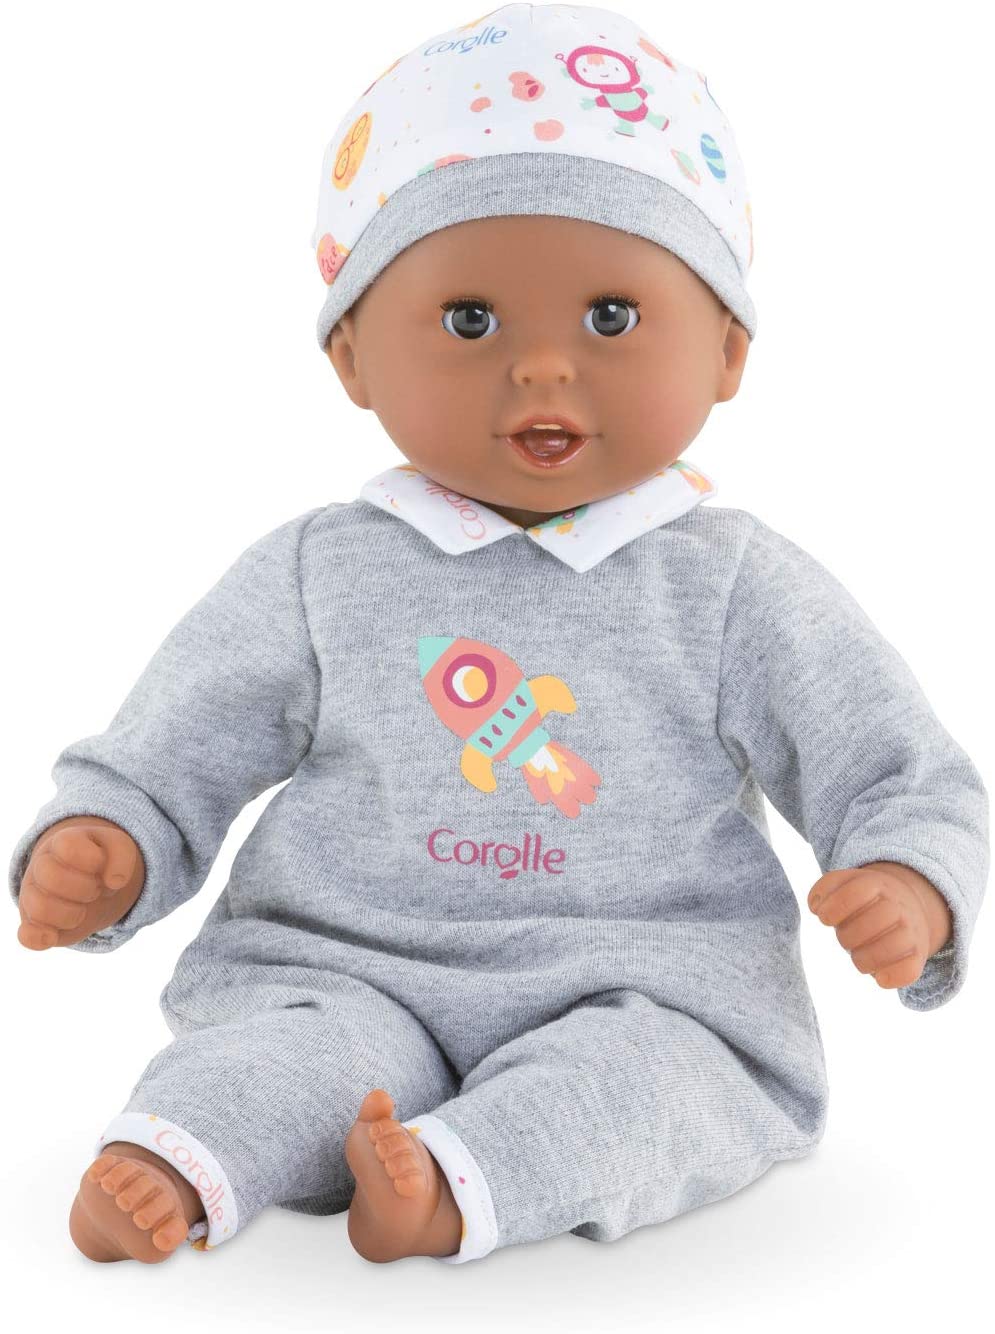 Corolle Mon Premier Poupon Bebe Calin Marius - 12” Boy Baby Doll, Poseable Soft Body with Vanilla Scent and Sleepy Eyes That Open and Close, for Kids Ages 18 Months and Up, Gray